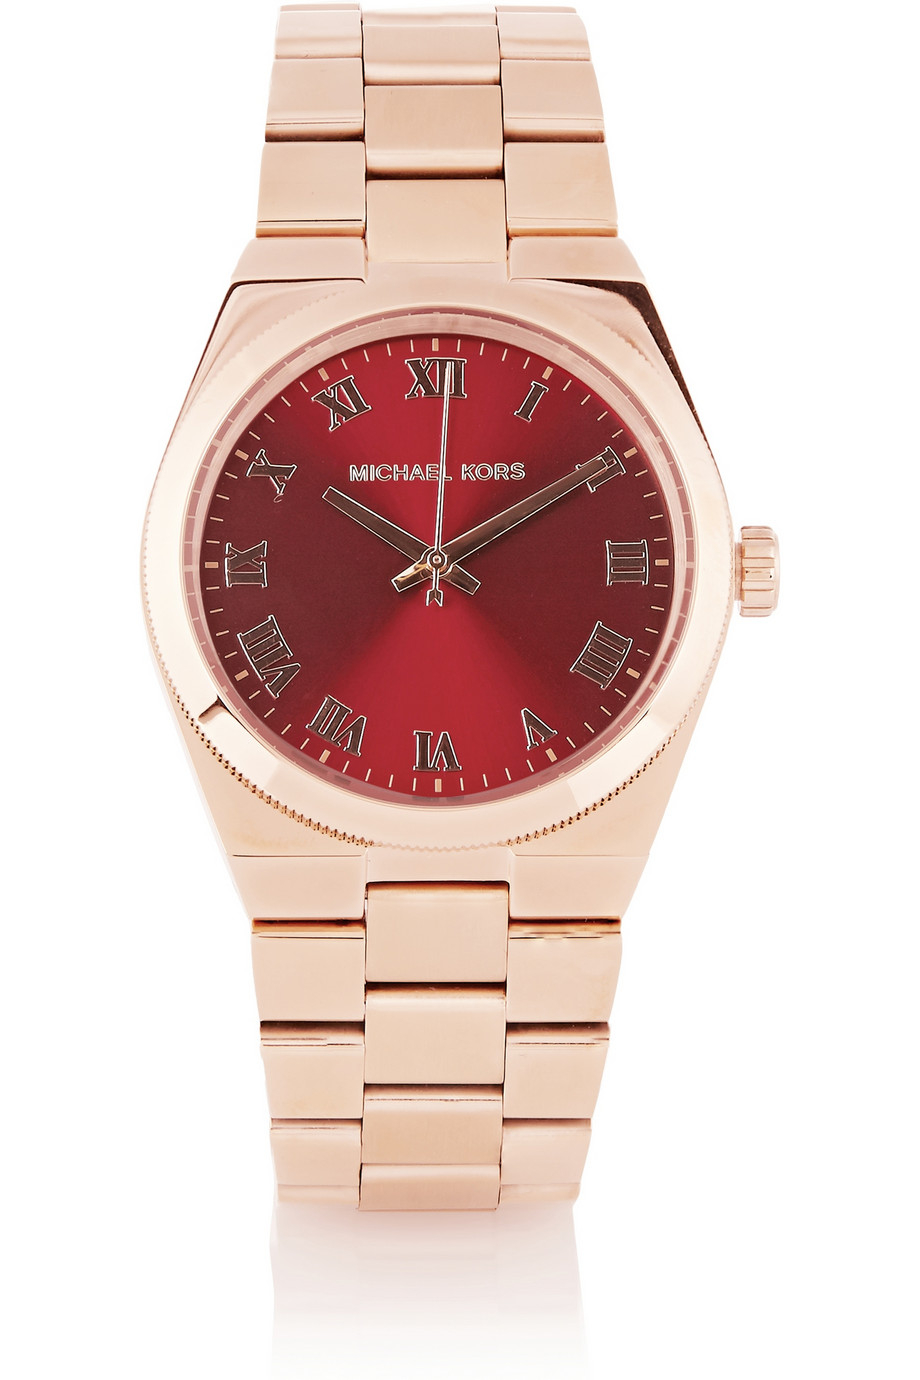 michael kors watch with red face